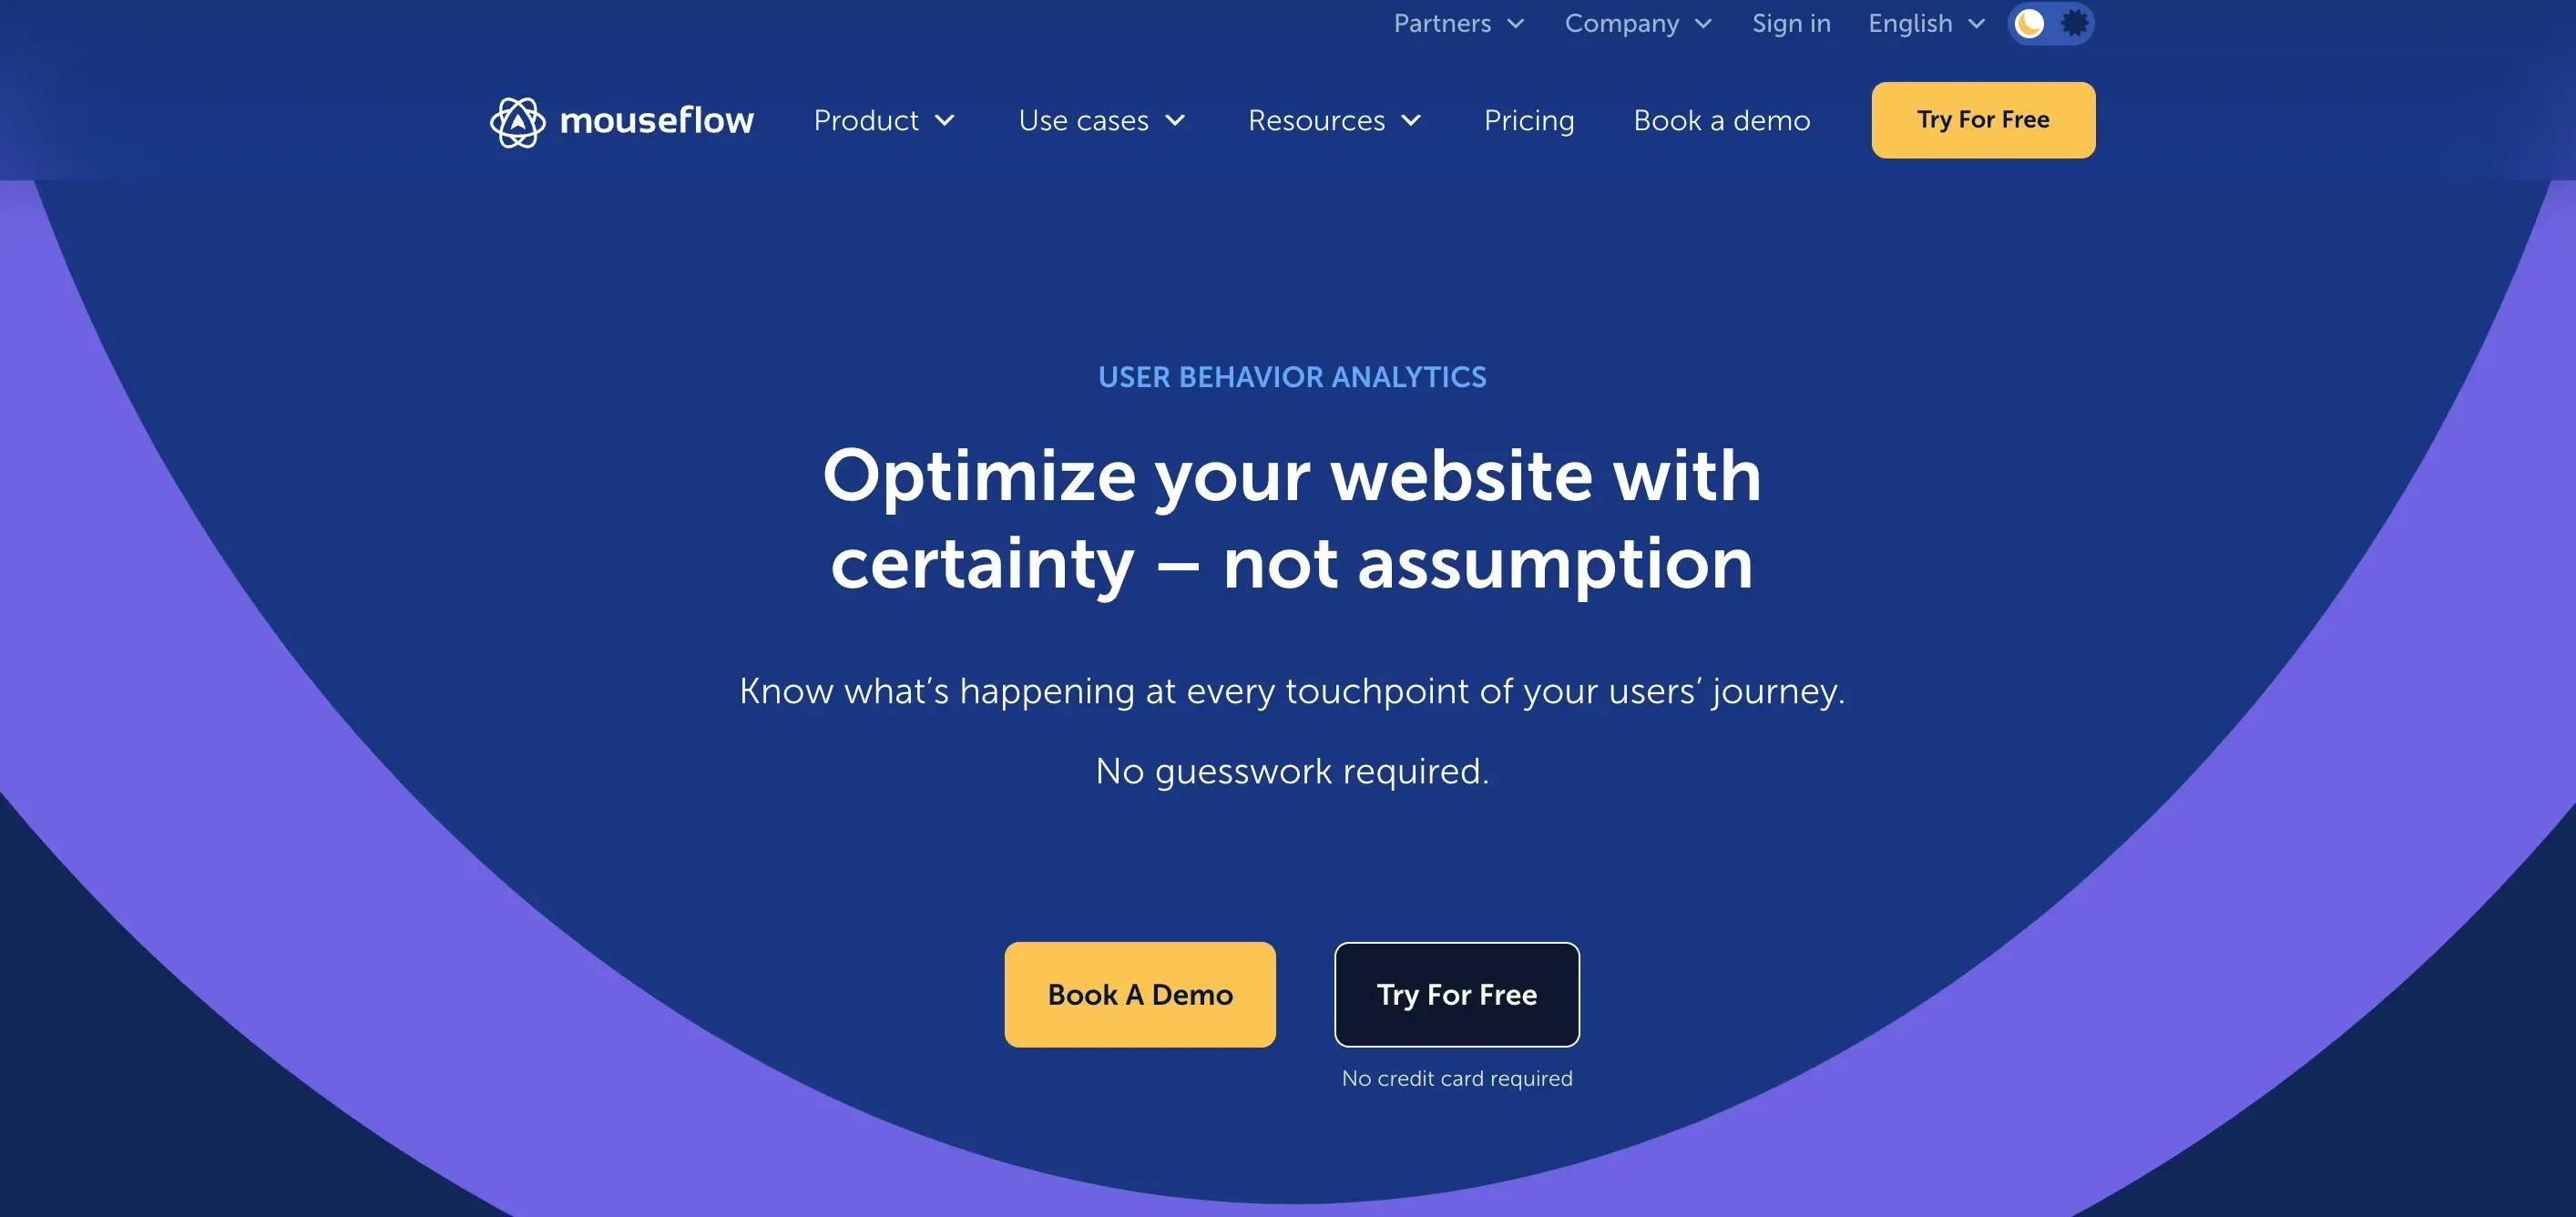 Mouseflow is a web analytics tool designed to provide insights into user behavior on websites.